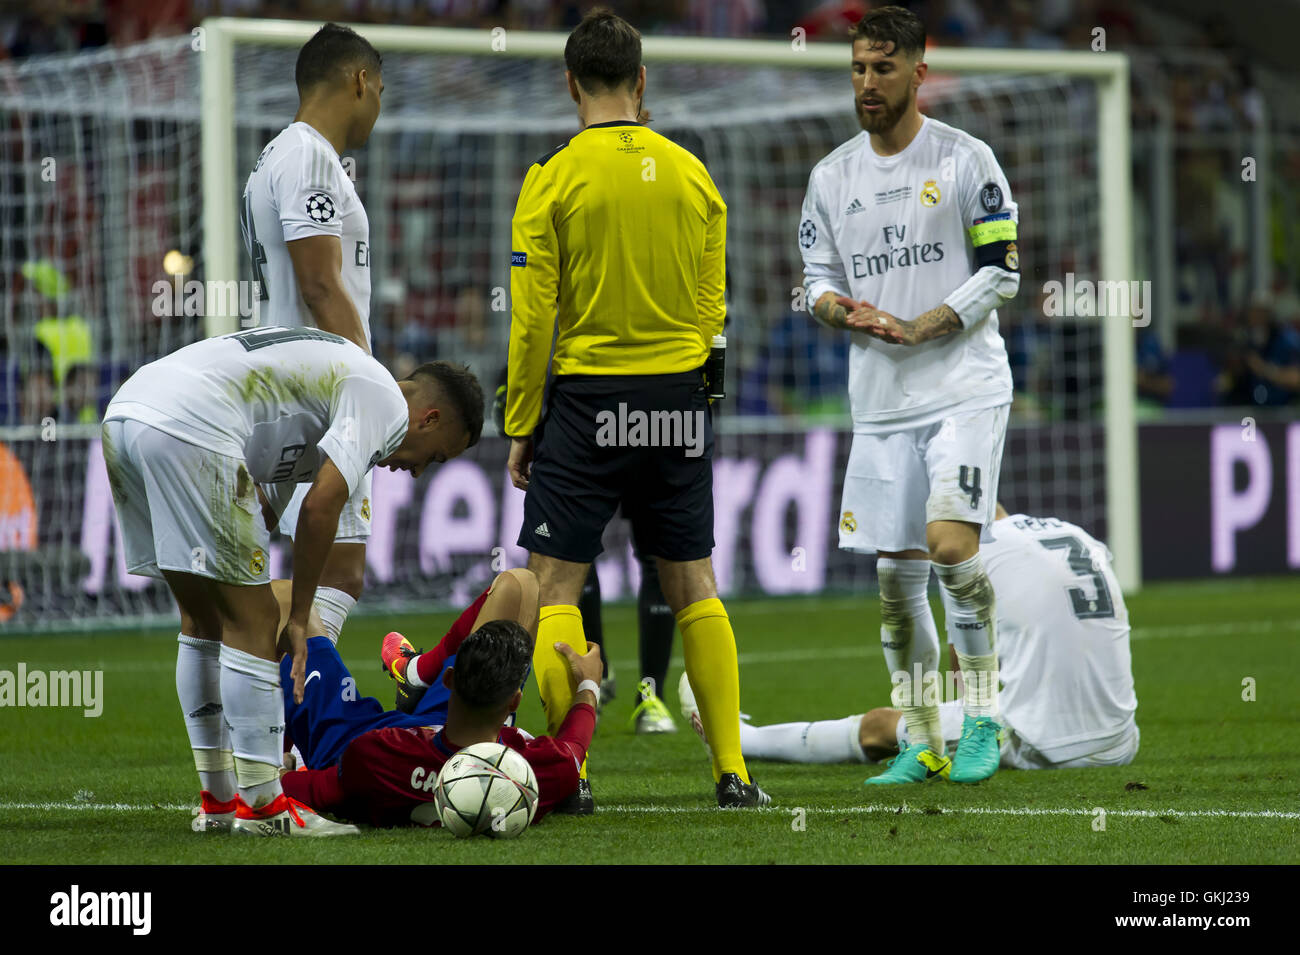 The UEFA Champions League Final 2016 - Real Madrid 5 (1) vs Athletico Madrid 1 (3)  Featuring: Yannick Ferreira-Carrasco of Atletico Madrid, Sergio Ramos and Pepe of Real Madrid and Mark Clattenburg Where: Milan, Italy When: 25 May 2016 Stock Photo